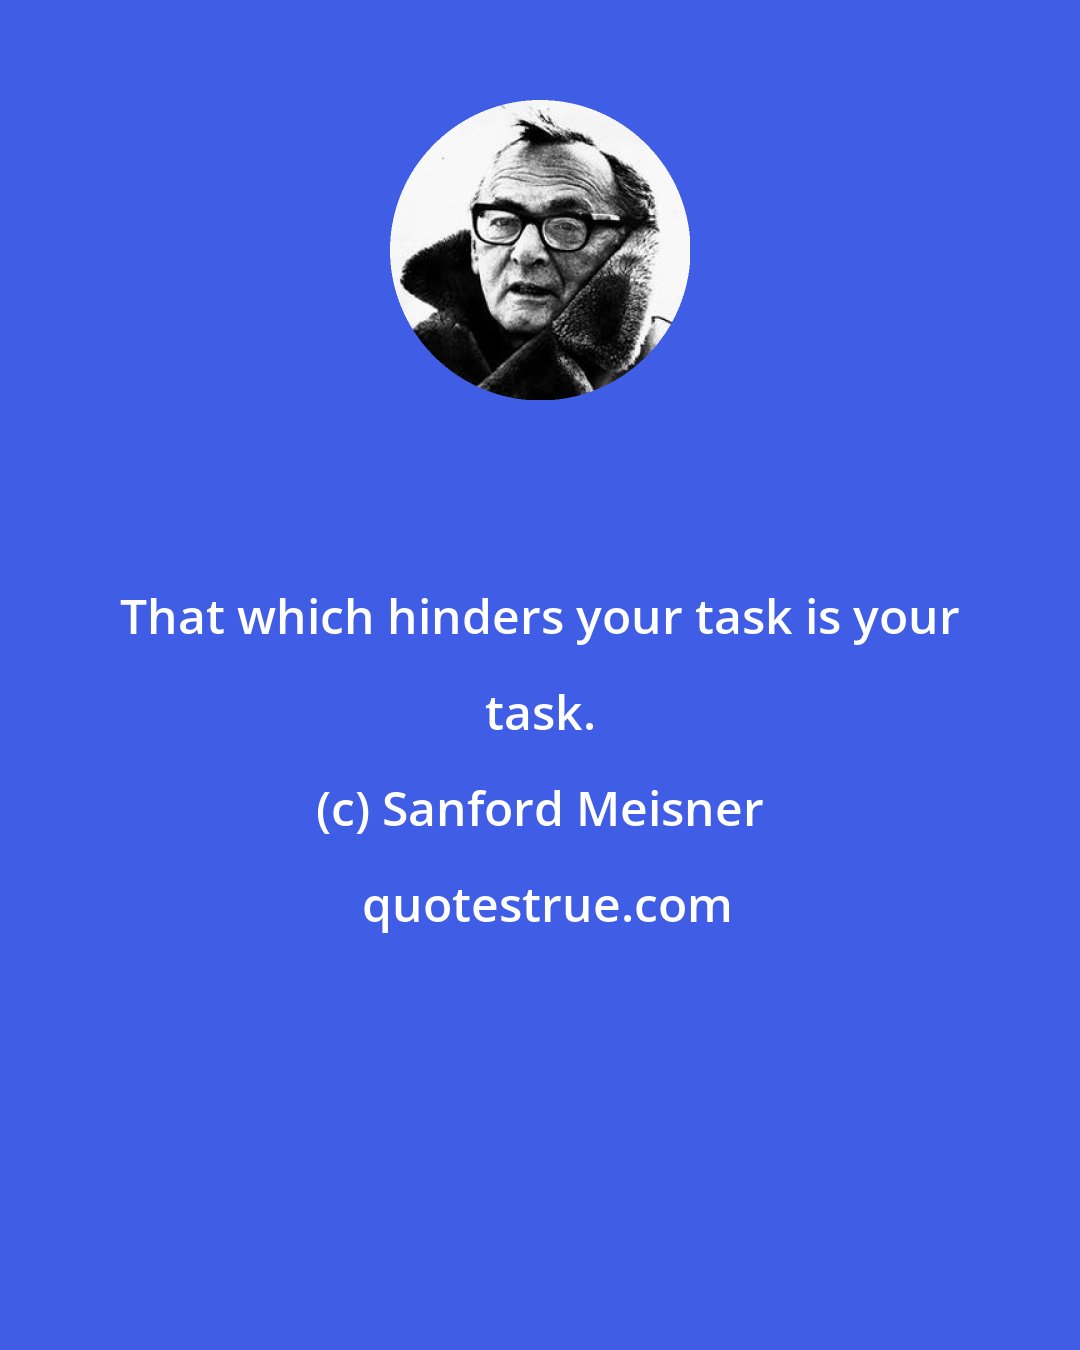 Sanford Meisner: That which hinders your task is your task.